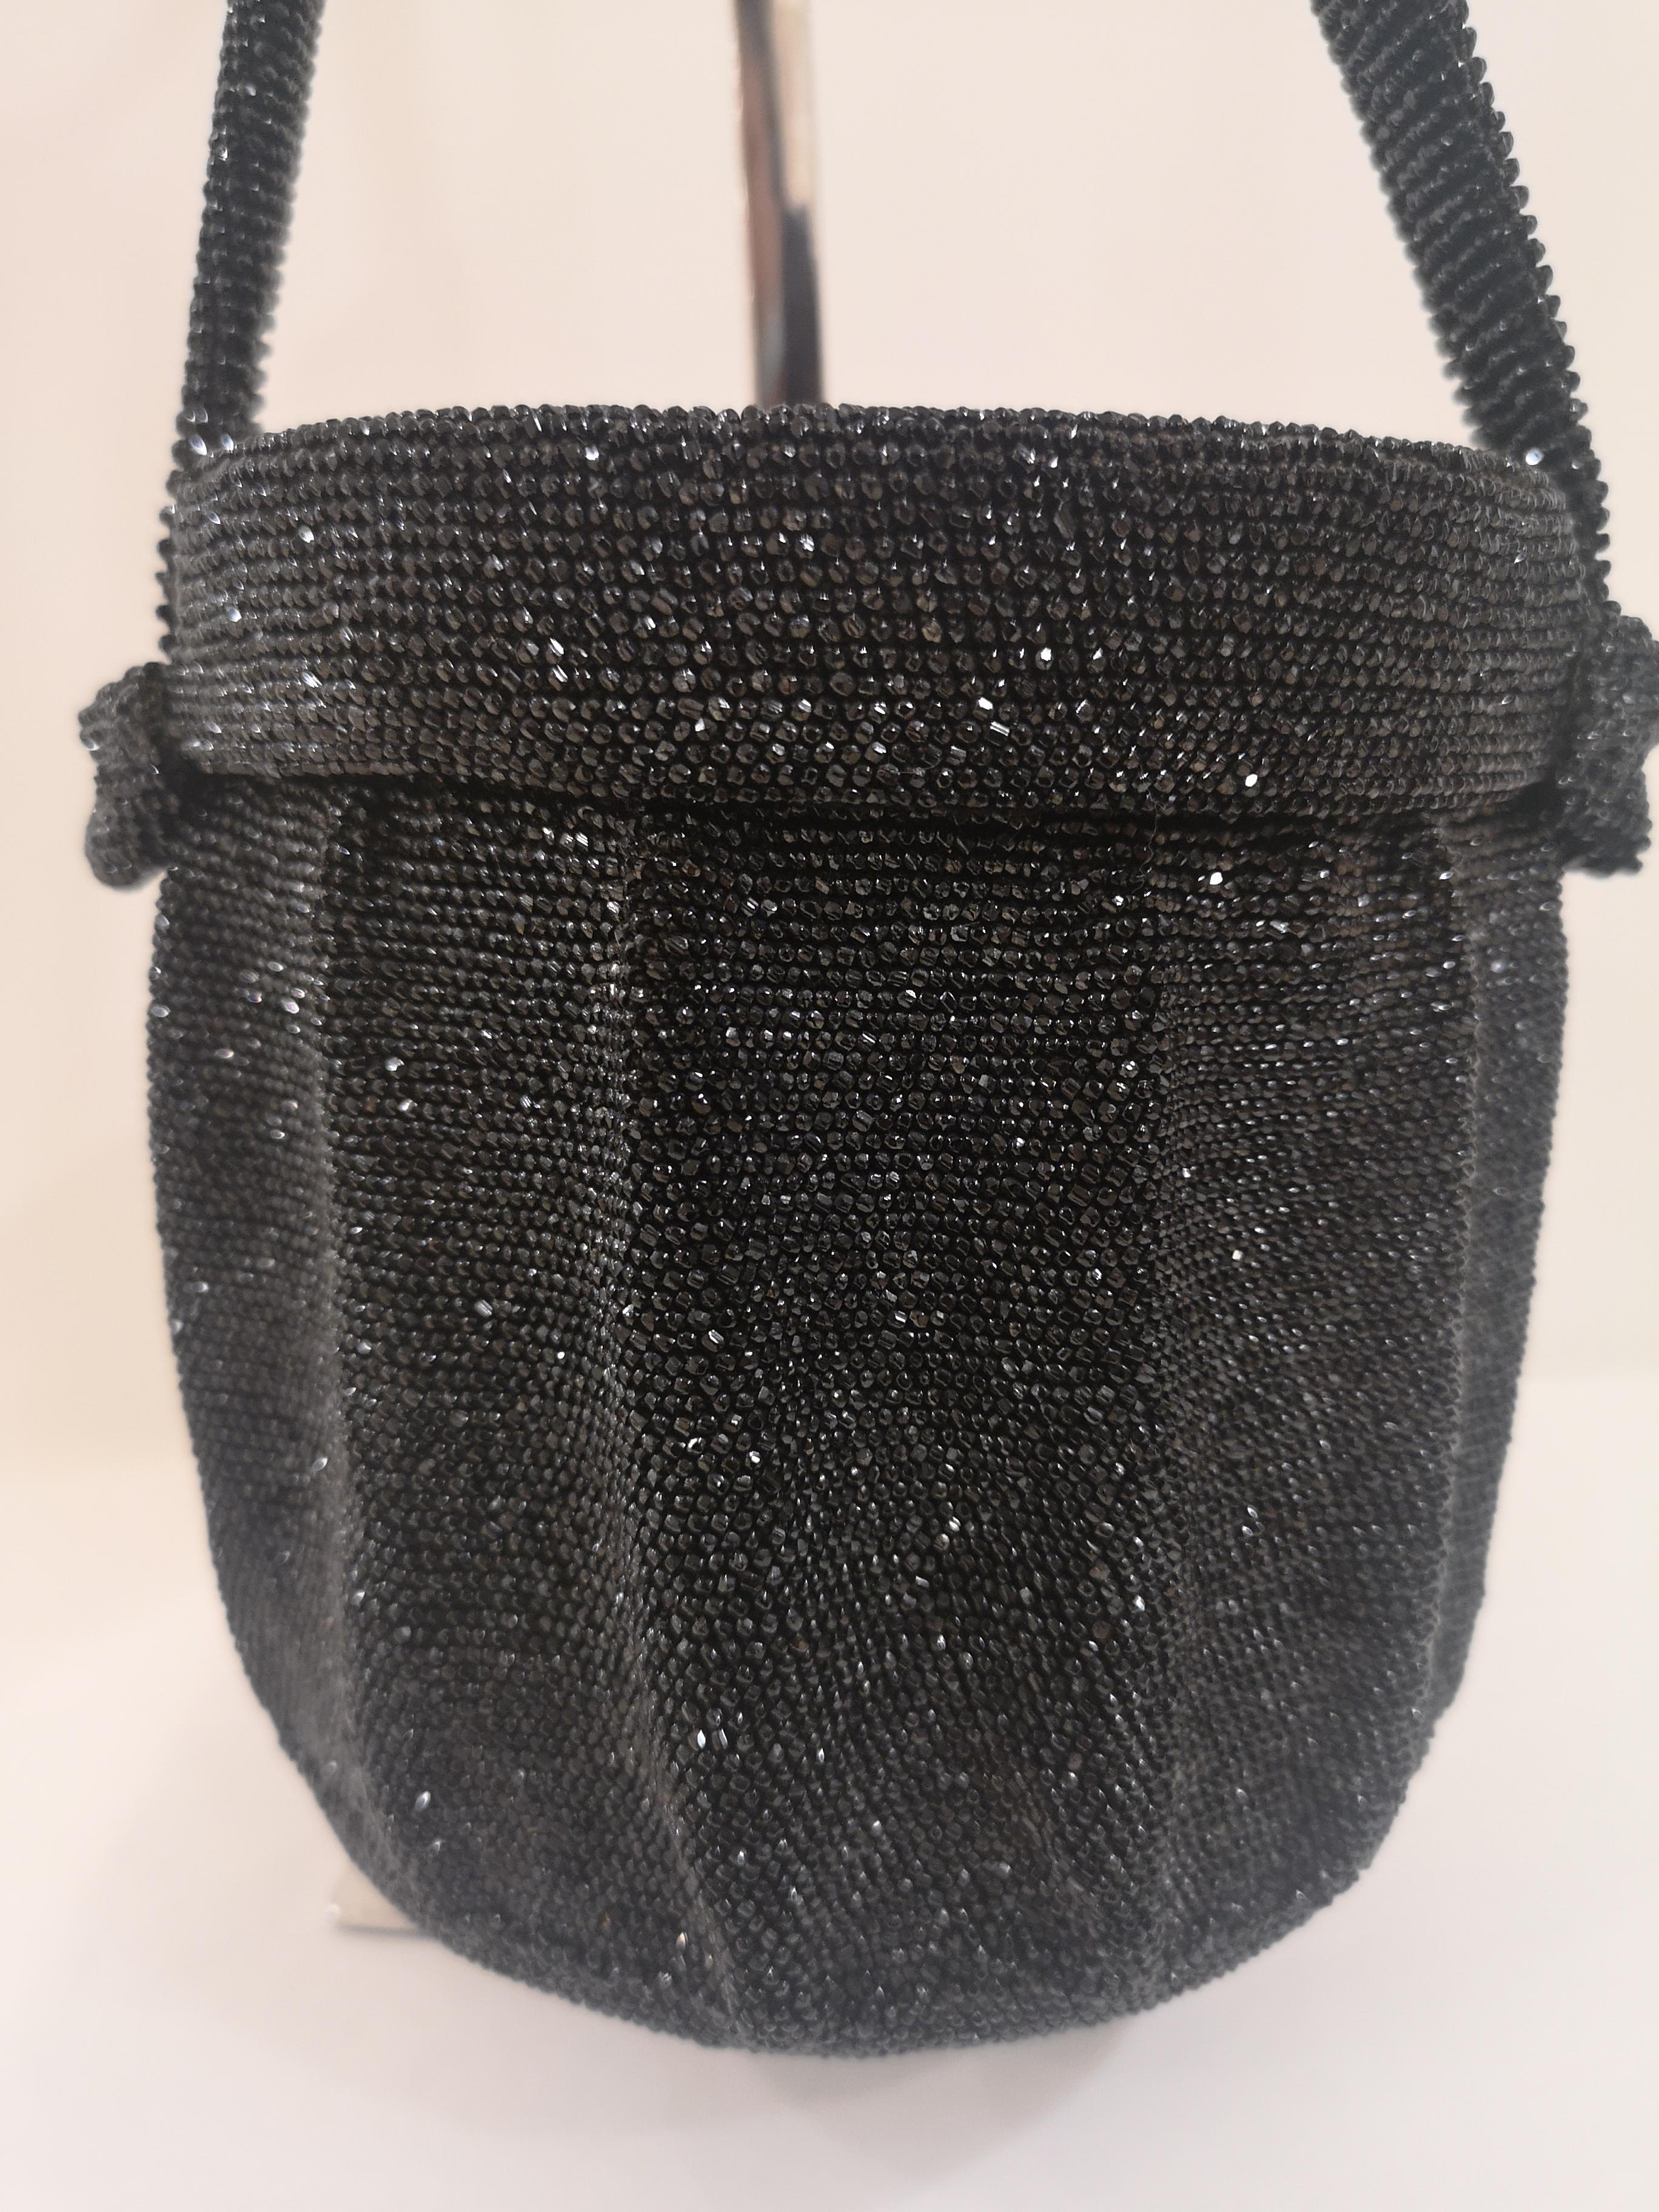 1980s Black beads satchel
really vintage satchel totally made in italy with black beads
mesurements: 14 cm * 15 cm diameter